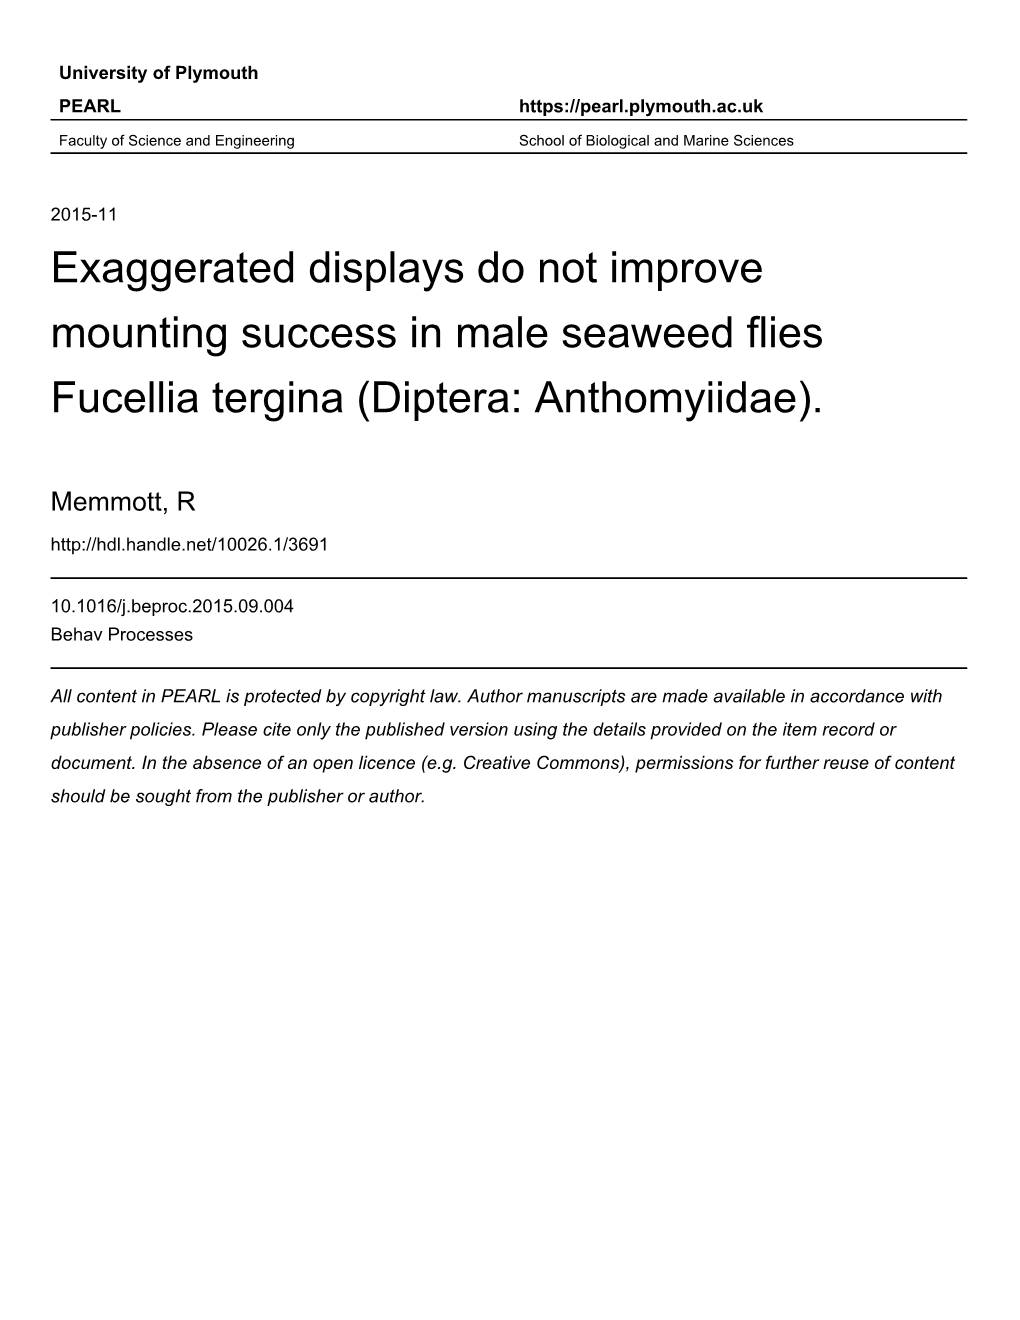 Exaggerated Displays Do Not Improve Mounting Success in Male Seaweed Flies Fucellia Tergina (Diptera: Anthomyiidae)